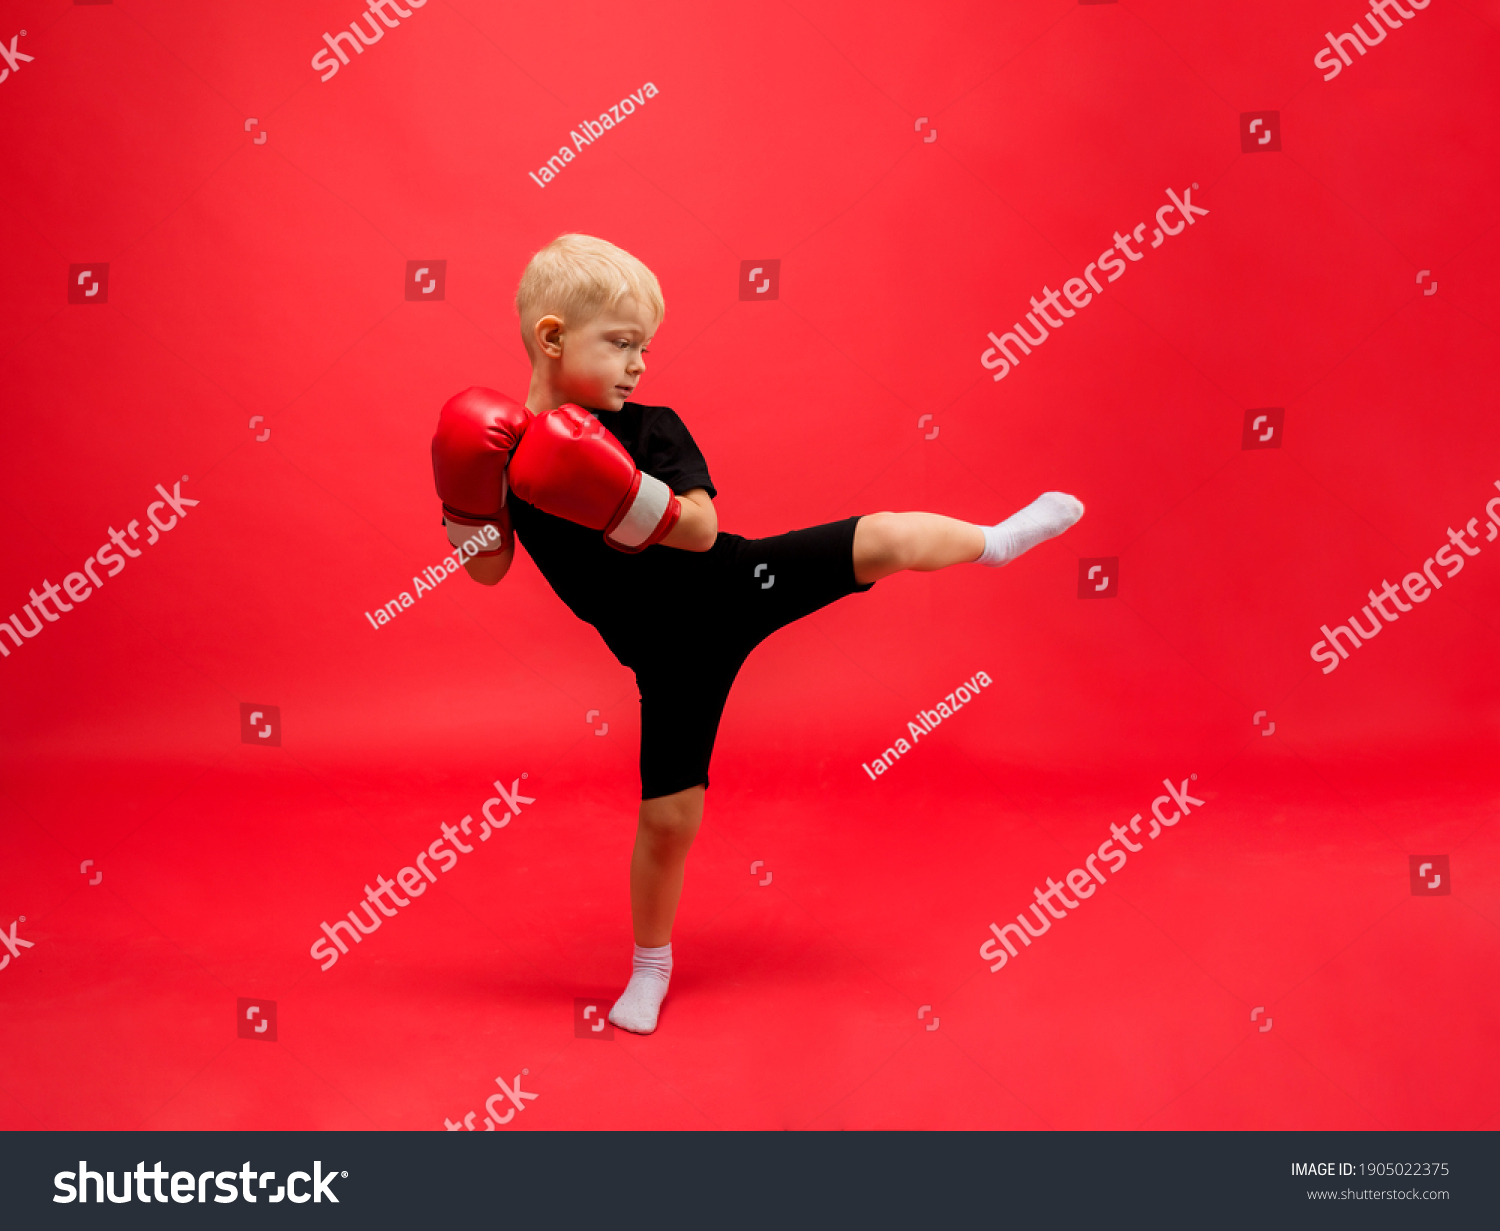 a little boy boxer stands sideways in red boxing gloves and makes a kick on a red background with space for text #1905022375